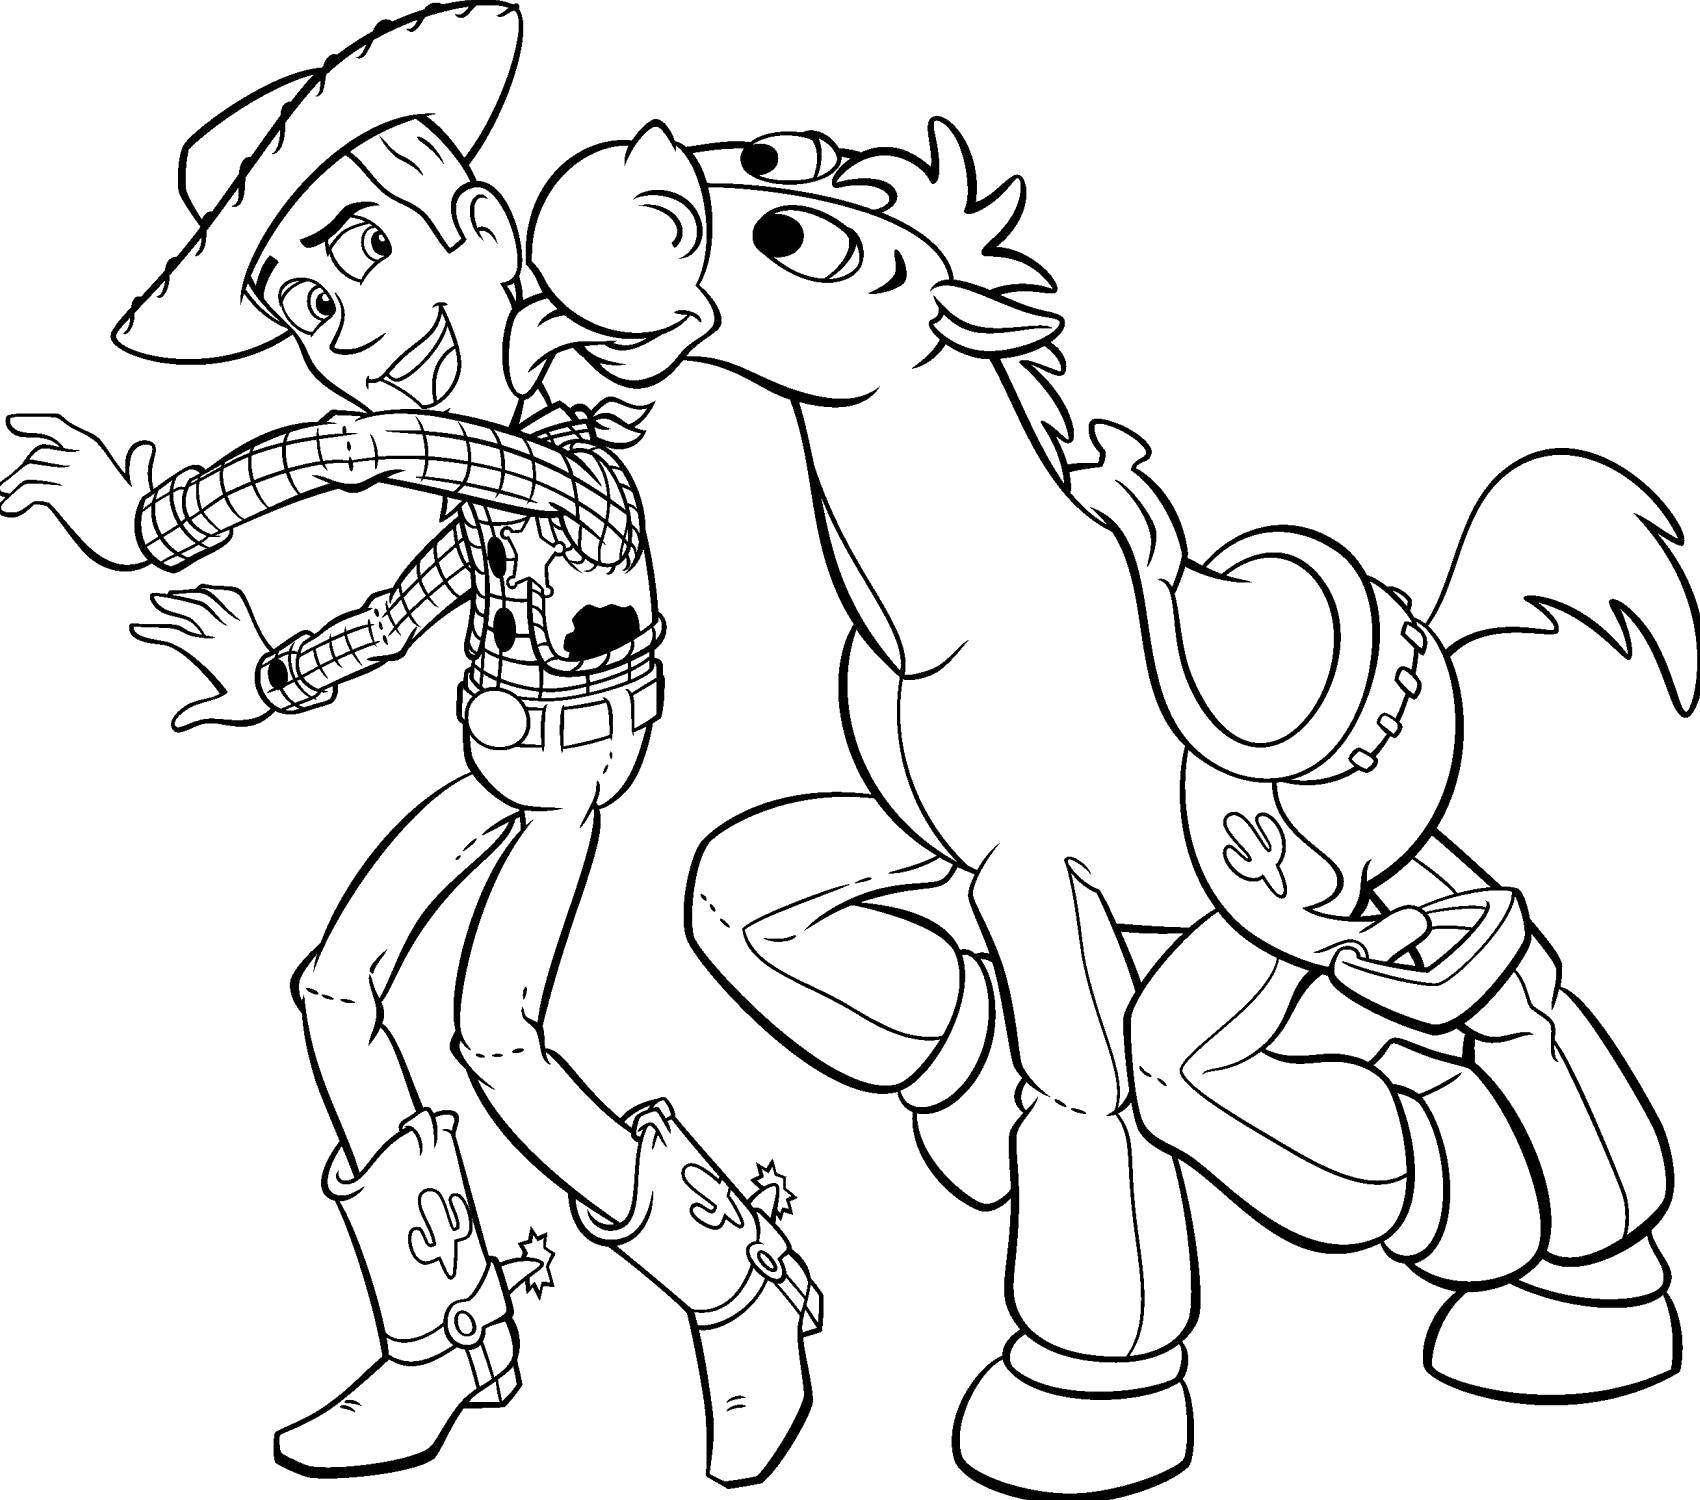 Coloring Sheriff woody with a horse.. Category coloring. Tags:  Cartoon character, toy Story.